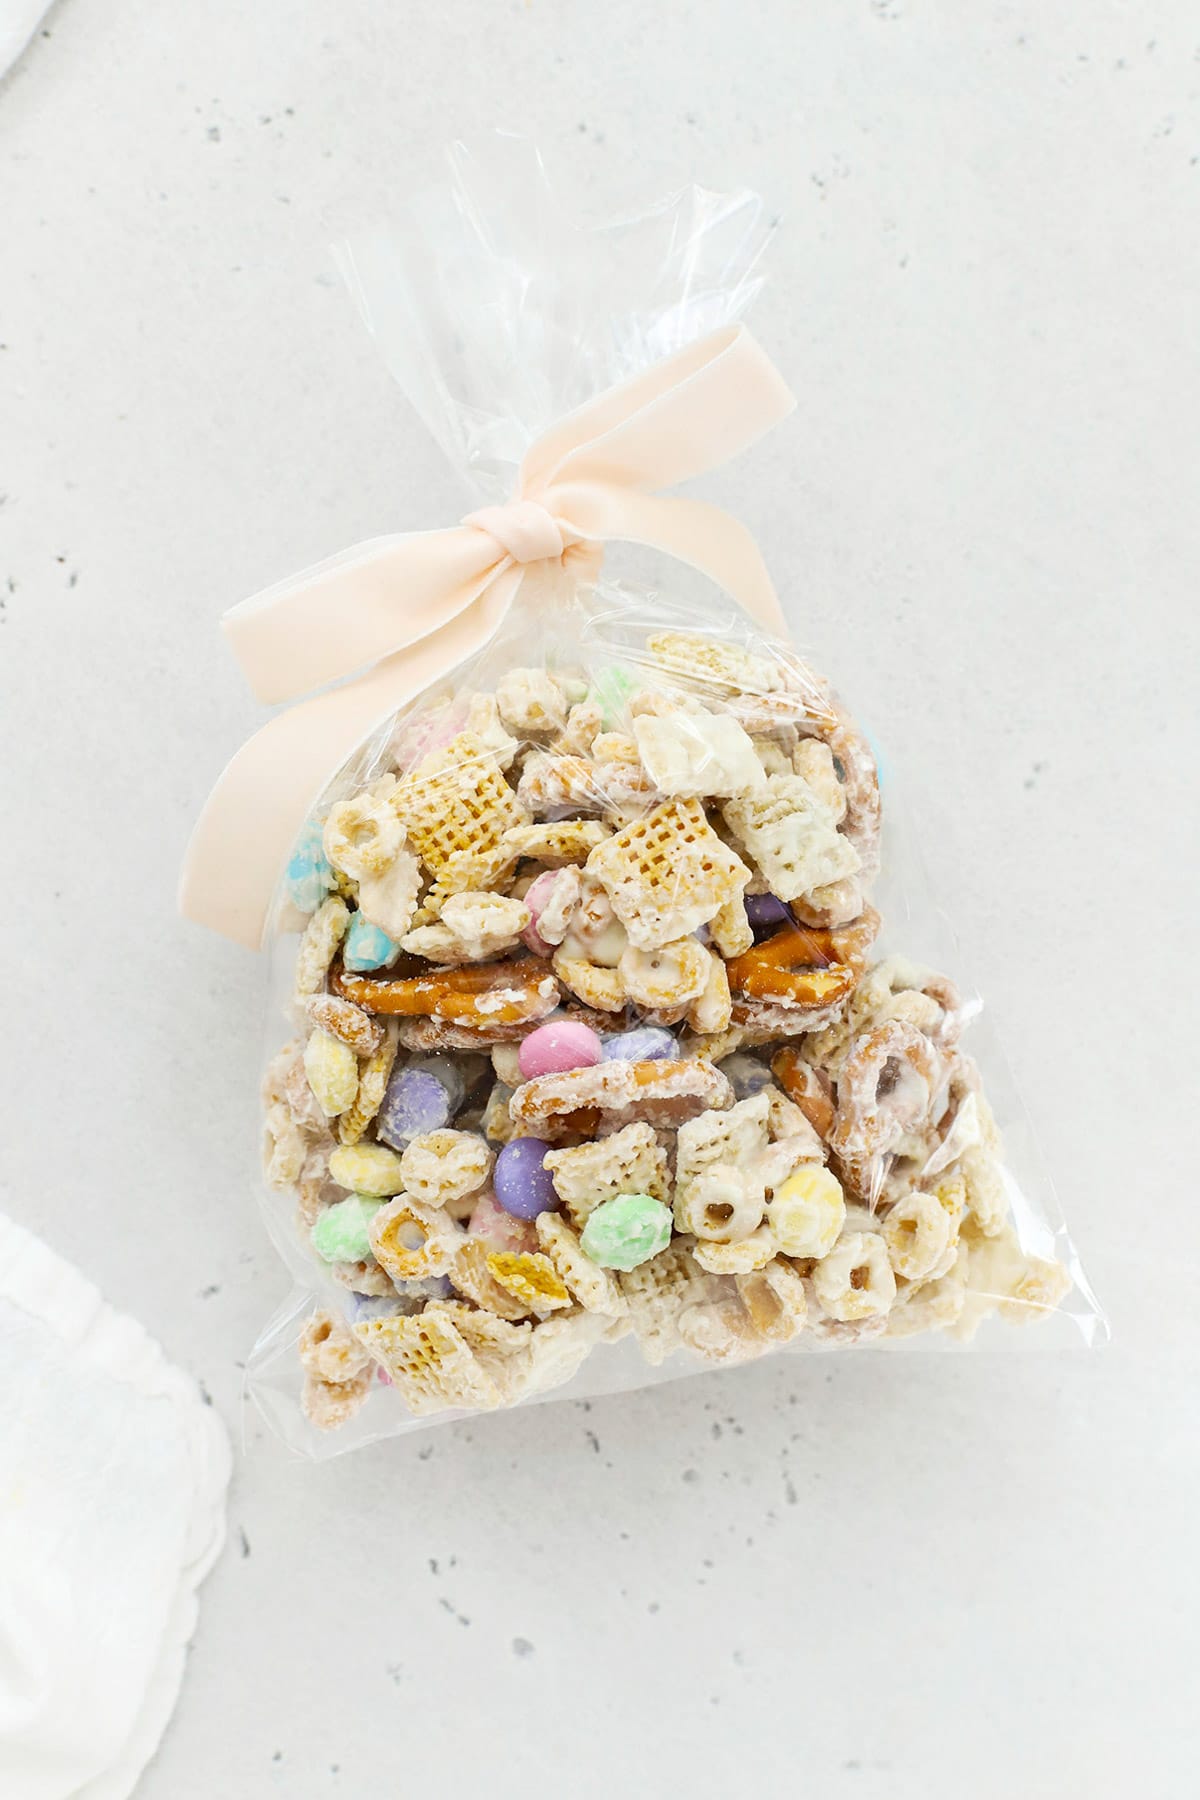 Gluten-Free Easter Chex Mix (Bunny Bait) In a bag to gift